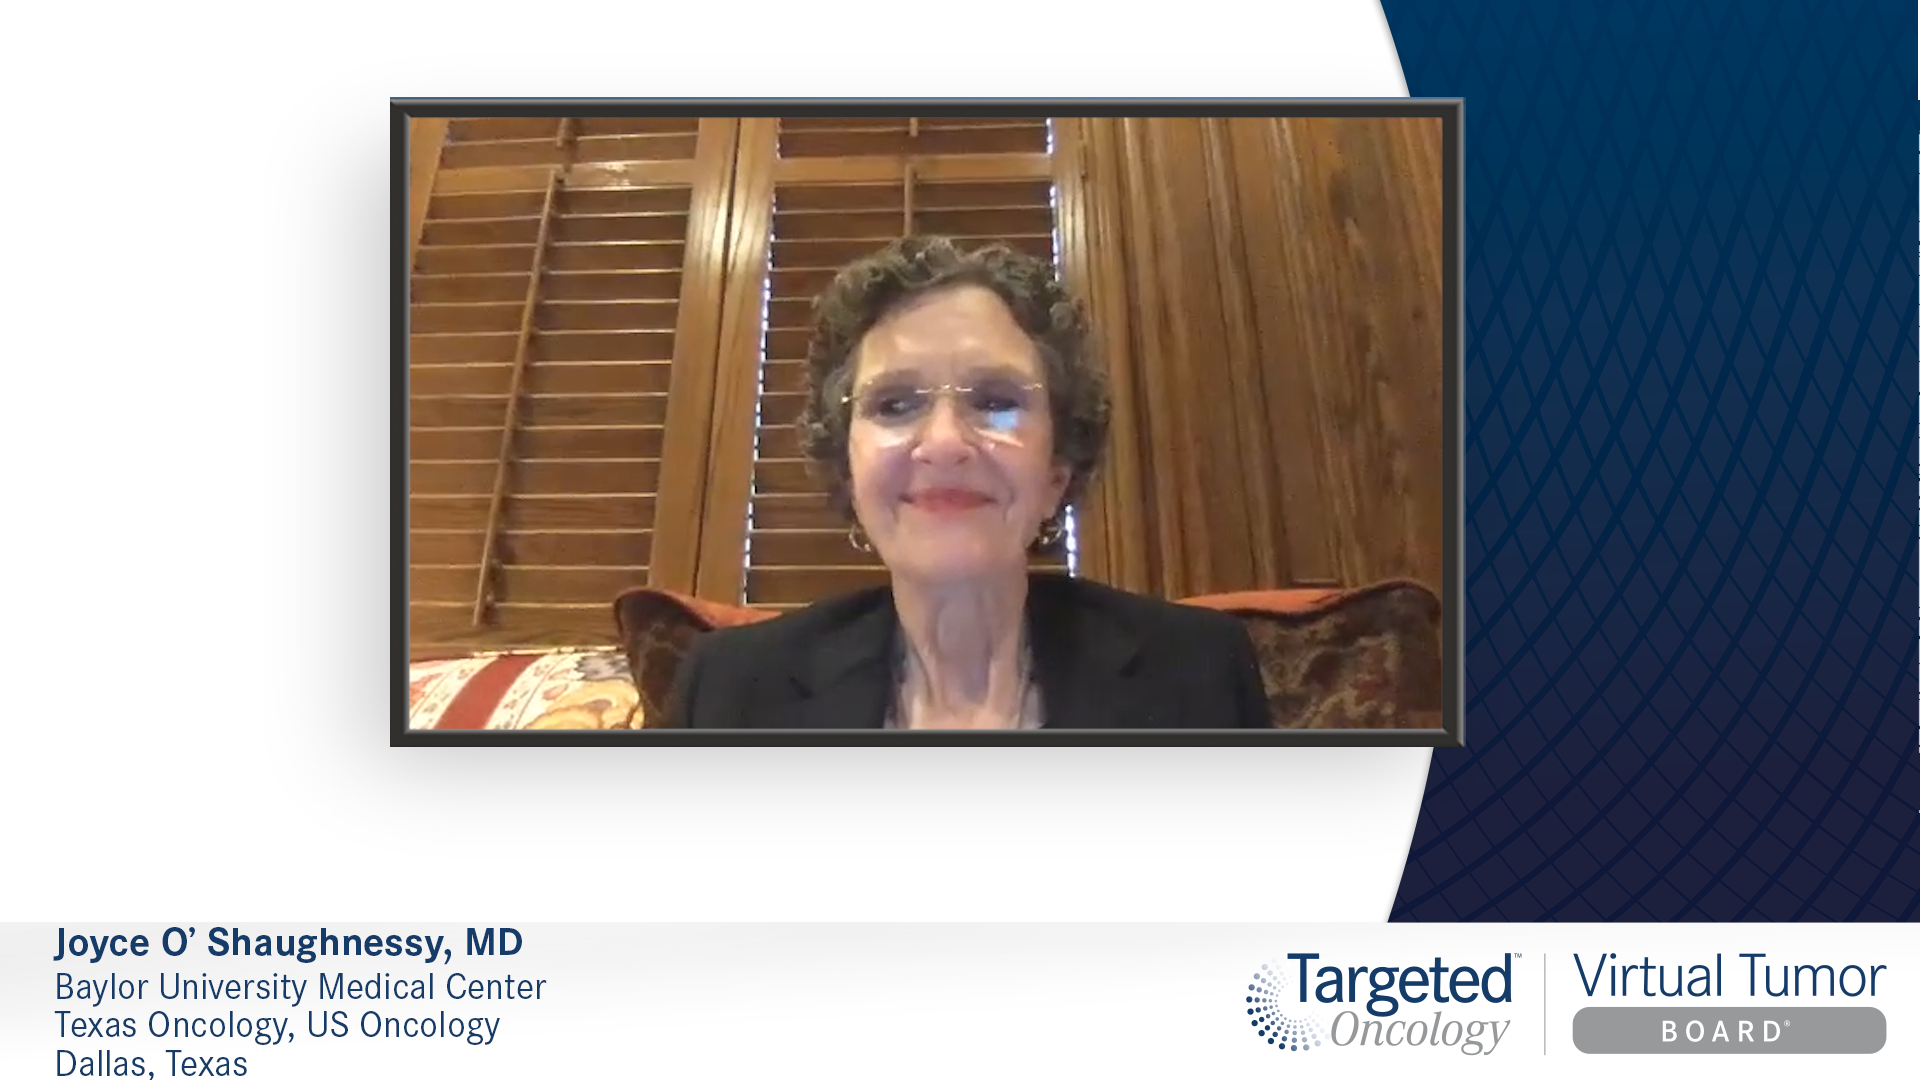 Case 1: Using Adjuvant Abemaciclib for High-Risk HR+ Early Breast Cancer